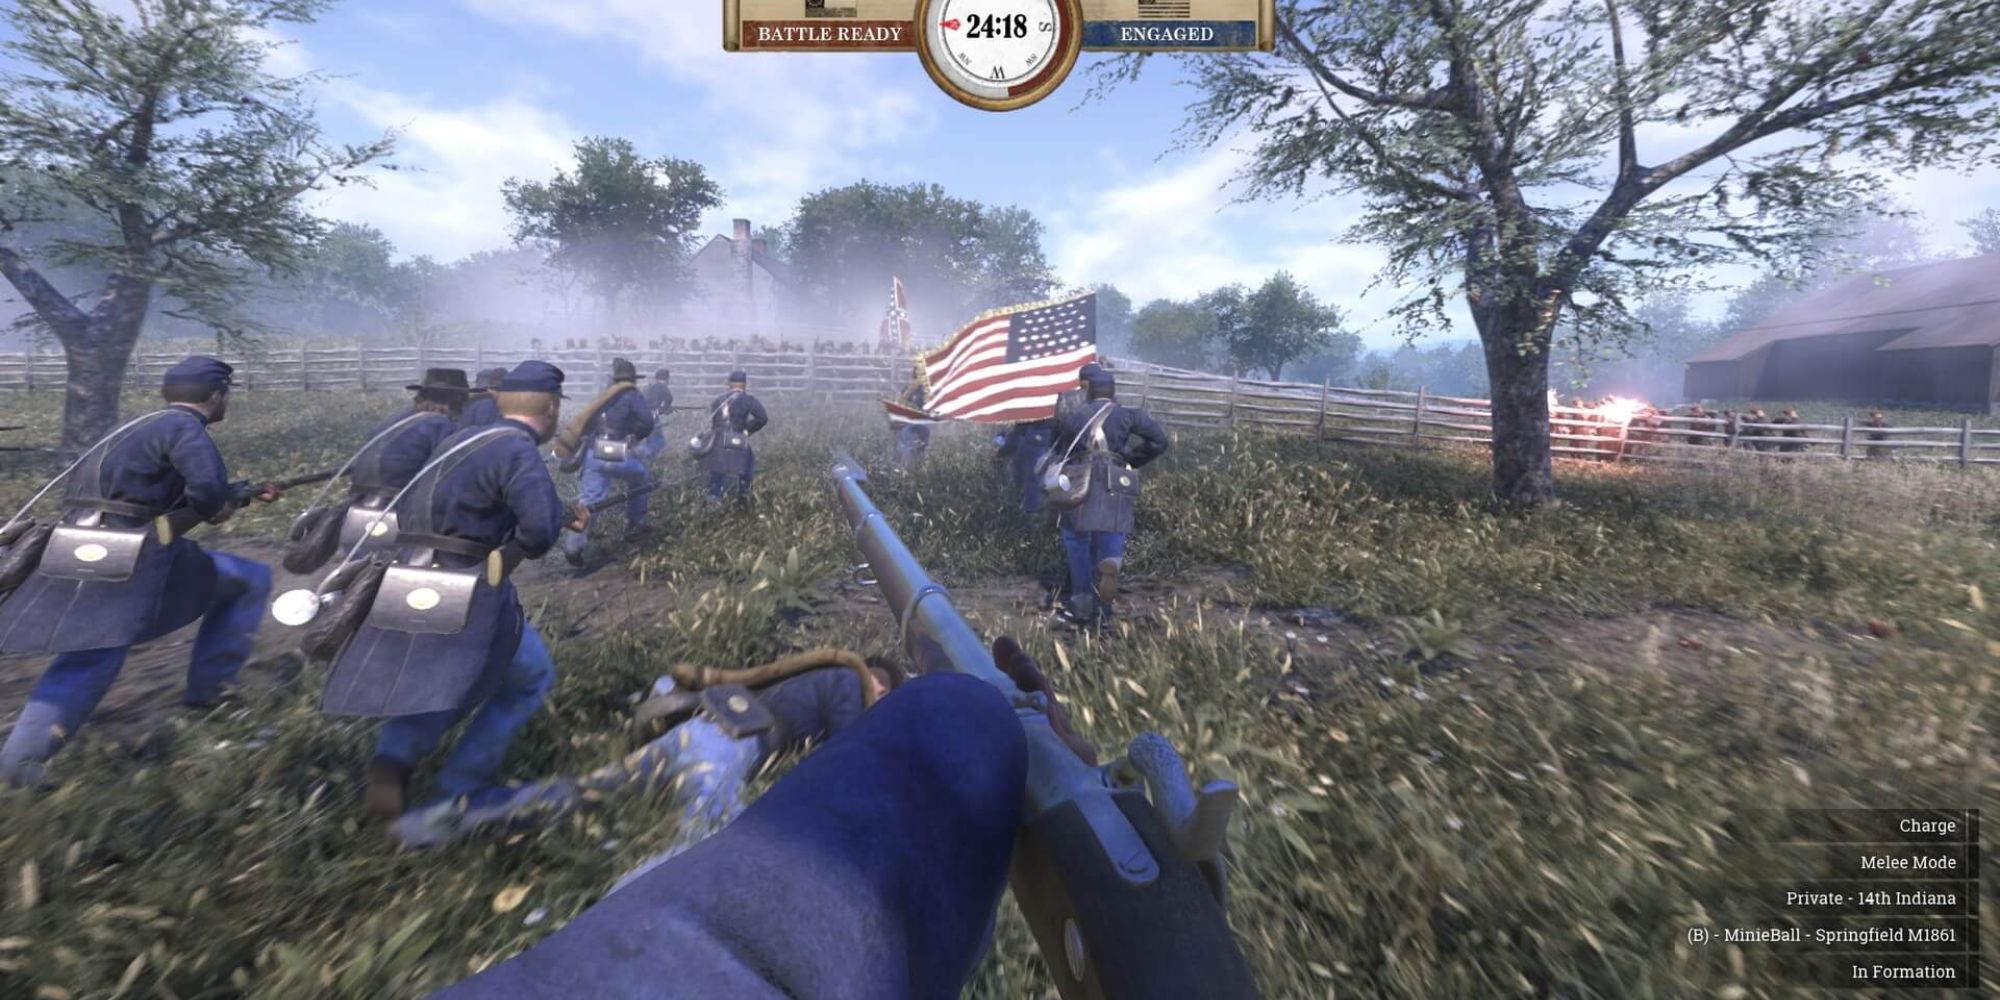 War of Rights Union Soldiers With Muskets Charging